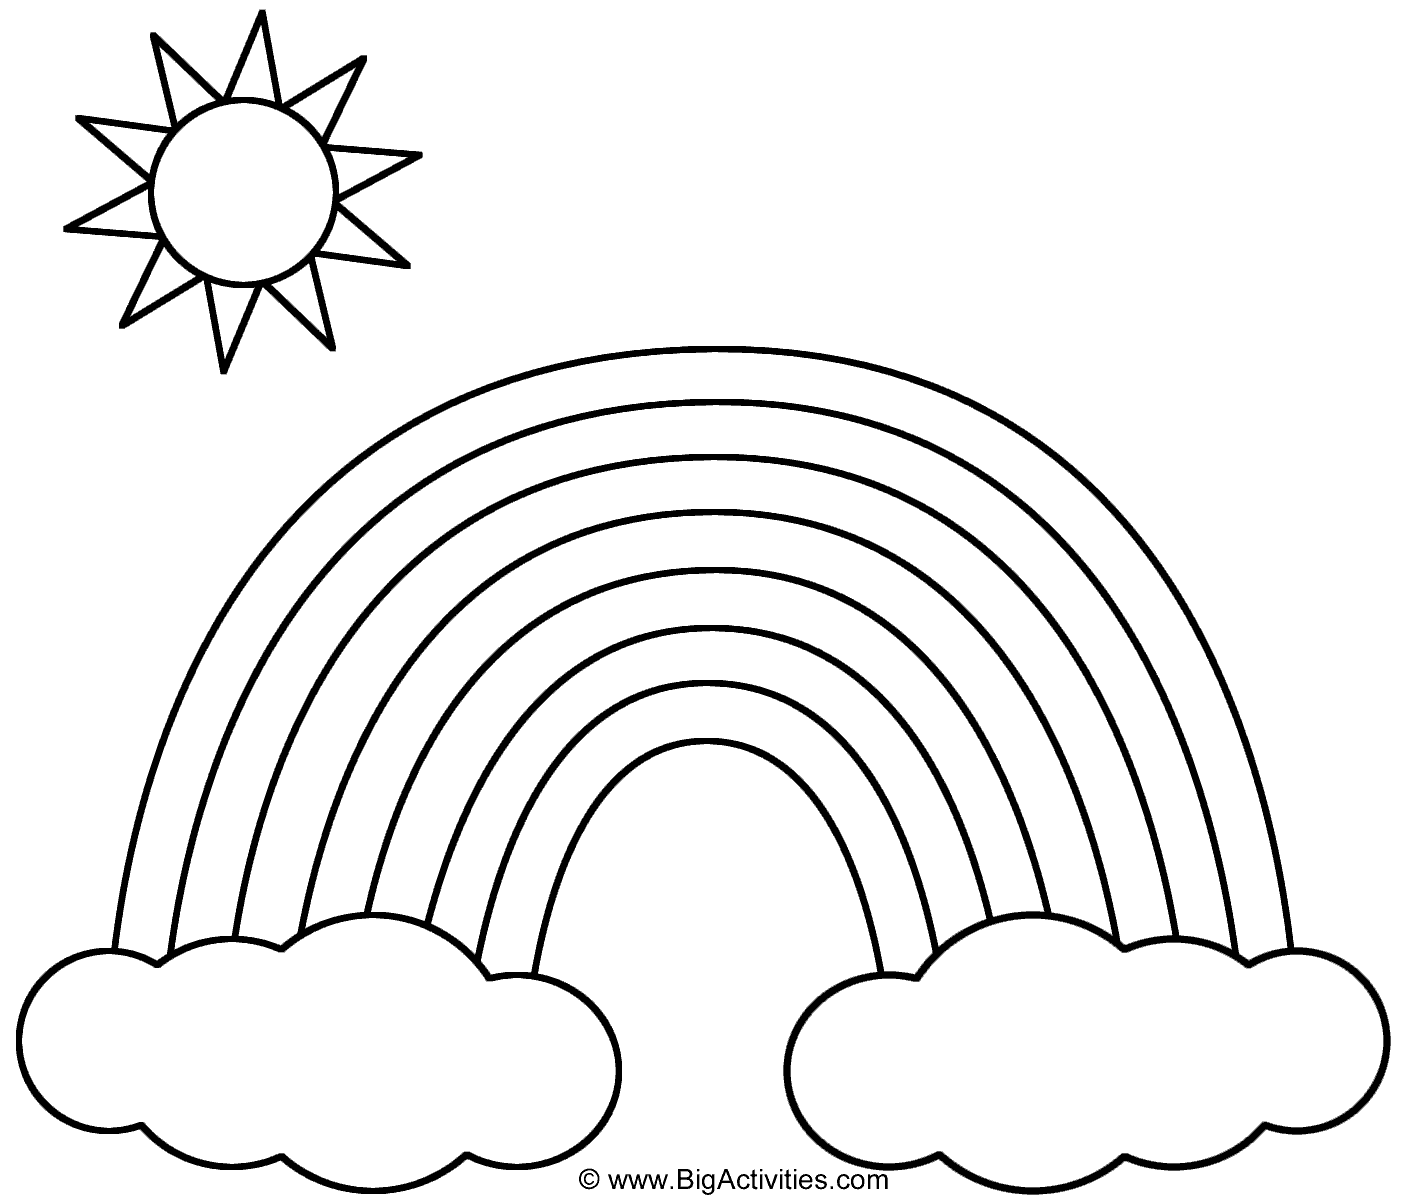 Download Rainbow with Clouds and Sun - Coloring Page (Nature)